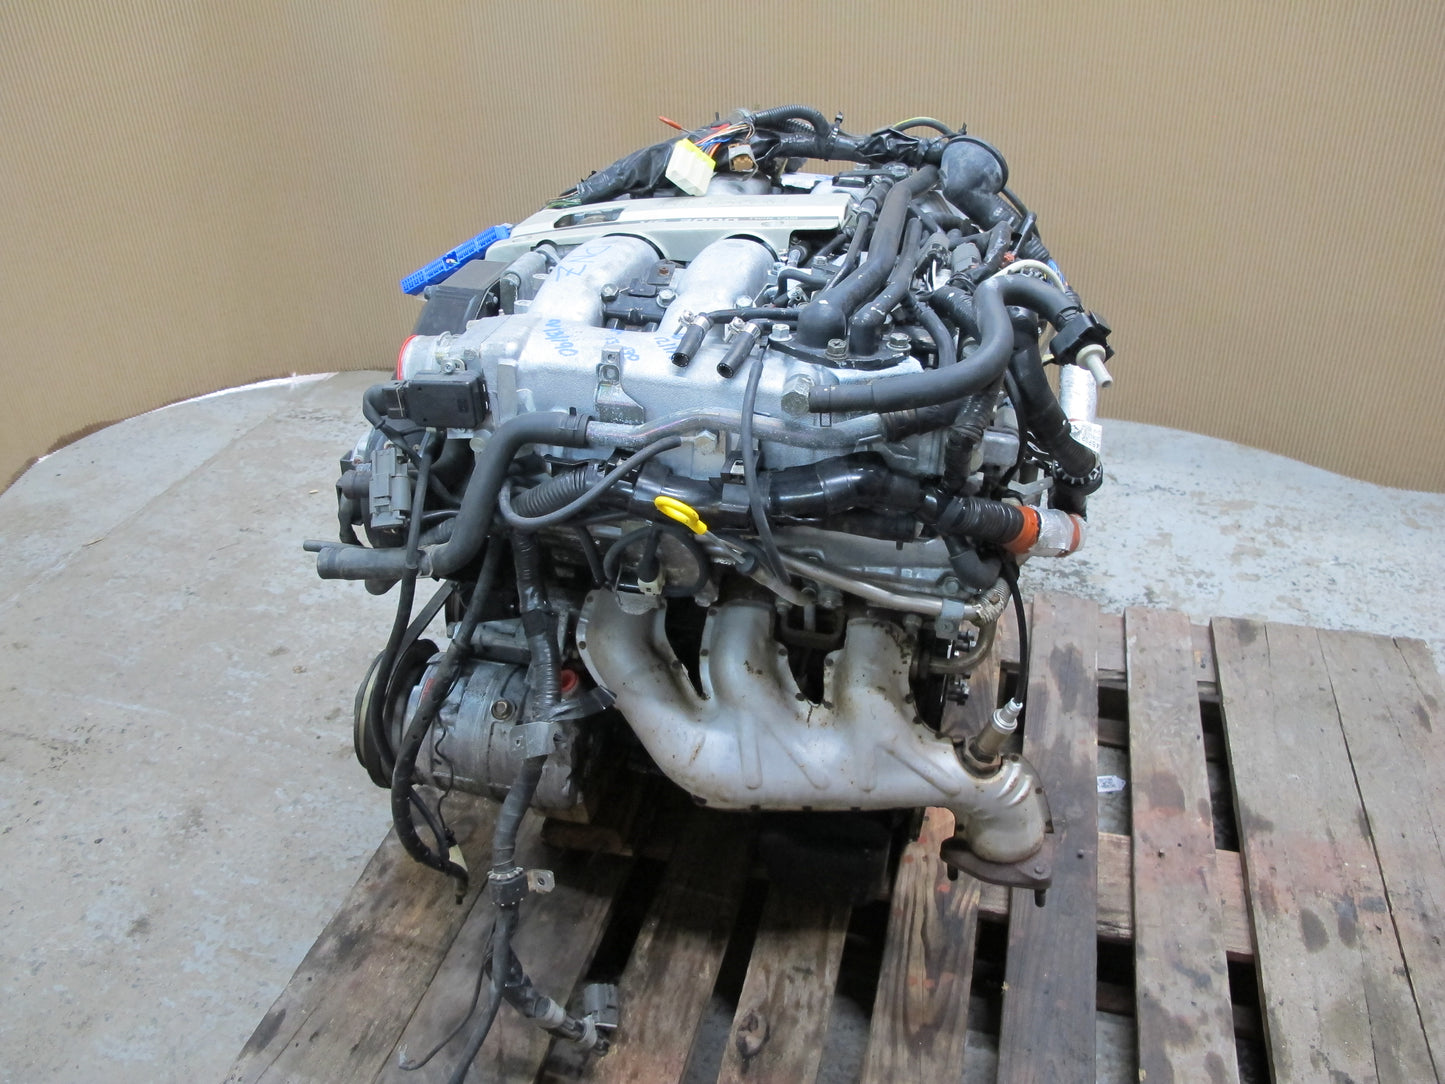 90-95 NISSAN Z32 300ZX 3.0L VG30D NON TURBO COMPLETE ENGINE MOTOR W 64k MILES